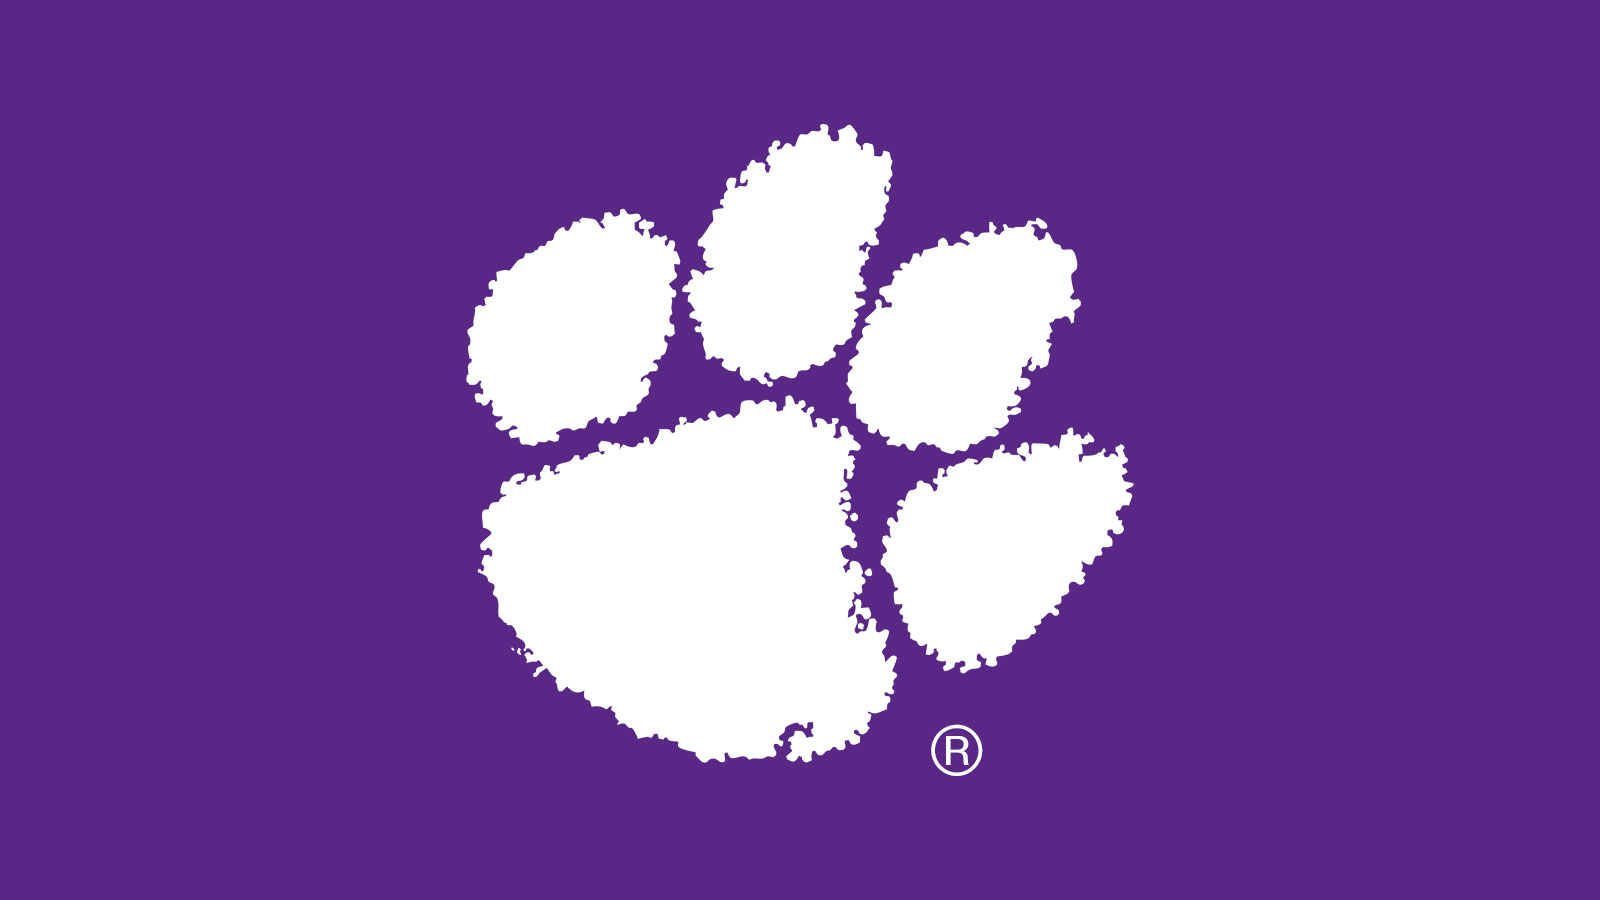 Mitch Norville devotes $1.5 million to a One Clemson gift. “To be successful … you have to have a will to lead.”